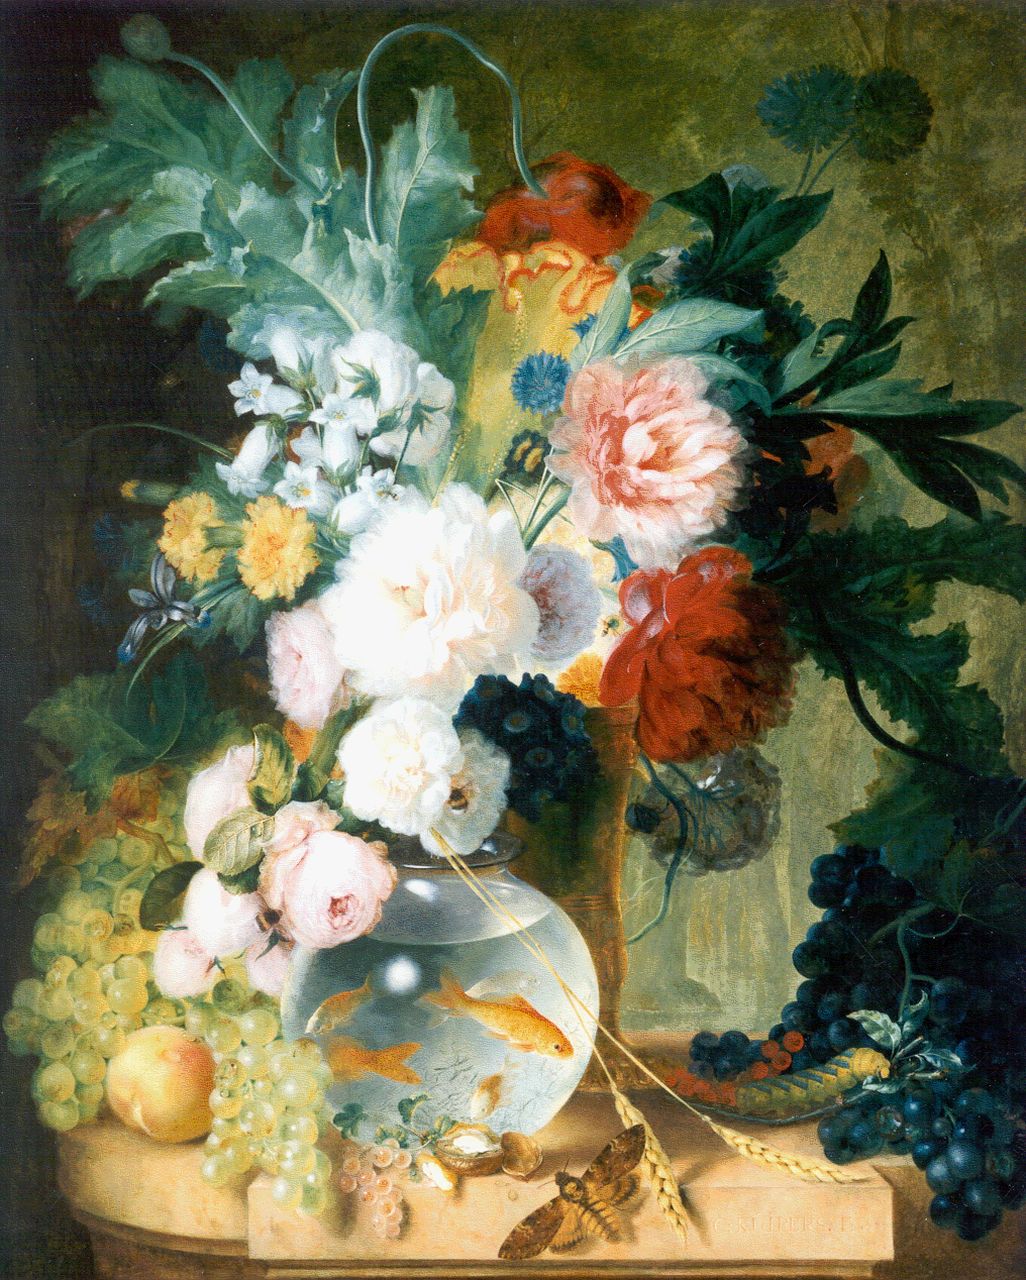 Kuipers C.  | Cornelis Kuipers, A still life with flowers, grapes and a butterfly on a marble ledge, oil on panel 87.0 x 70.0 cm, signed l.r. and dated 1777